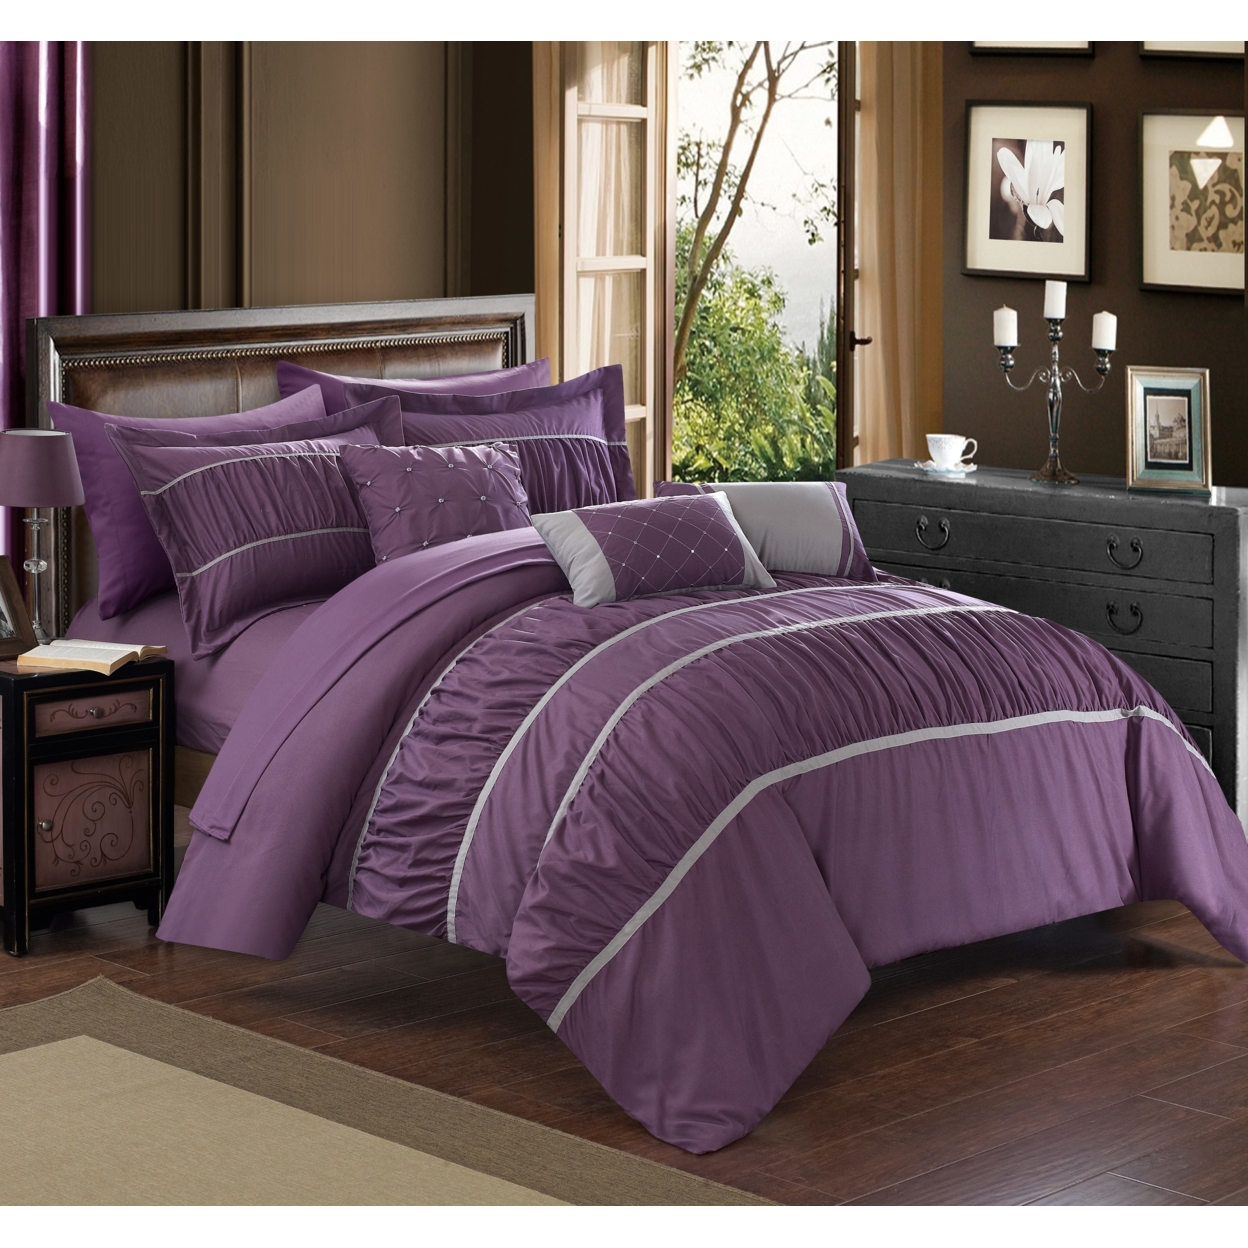 10-Piece Aero Pleated & Ruffled Bed In A Bag Comforter And Sheet Set - Plum, King